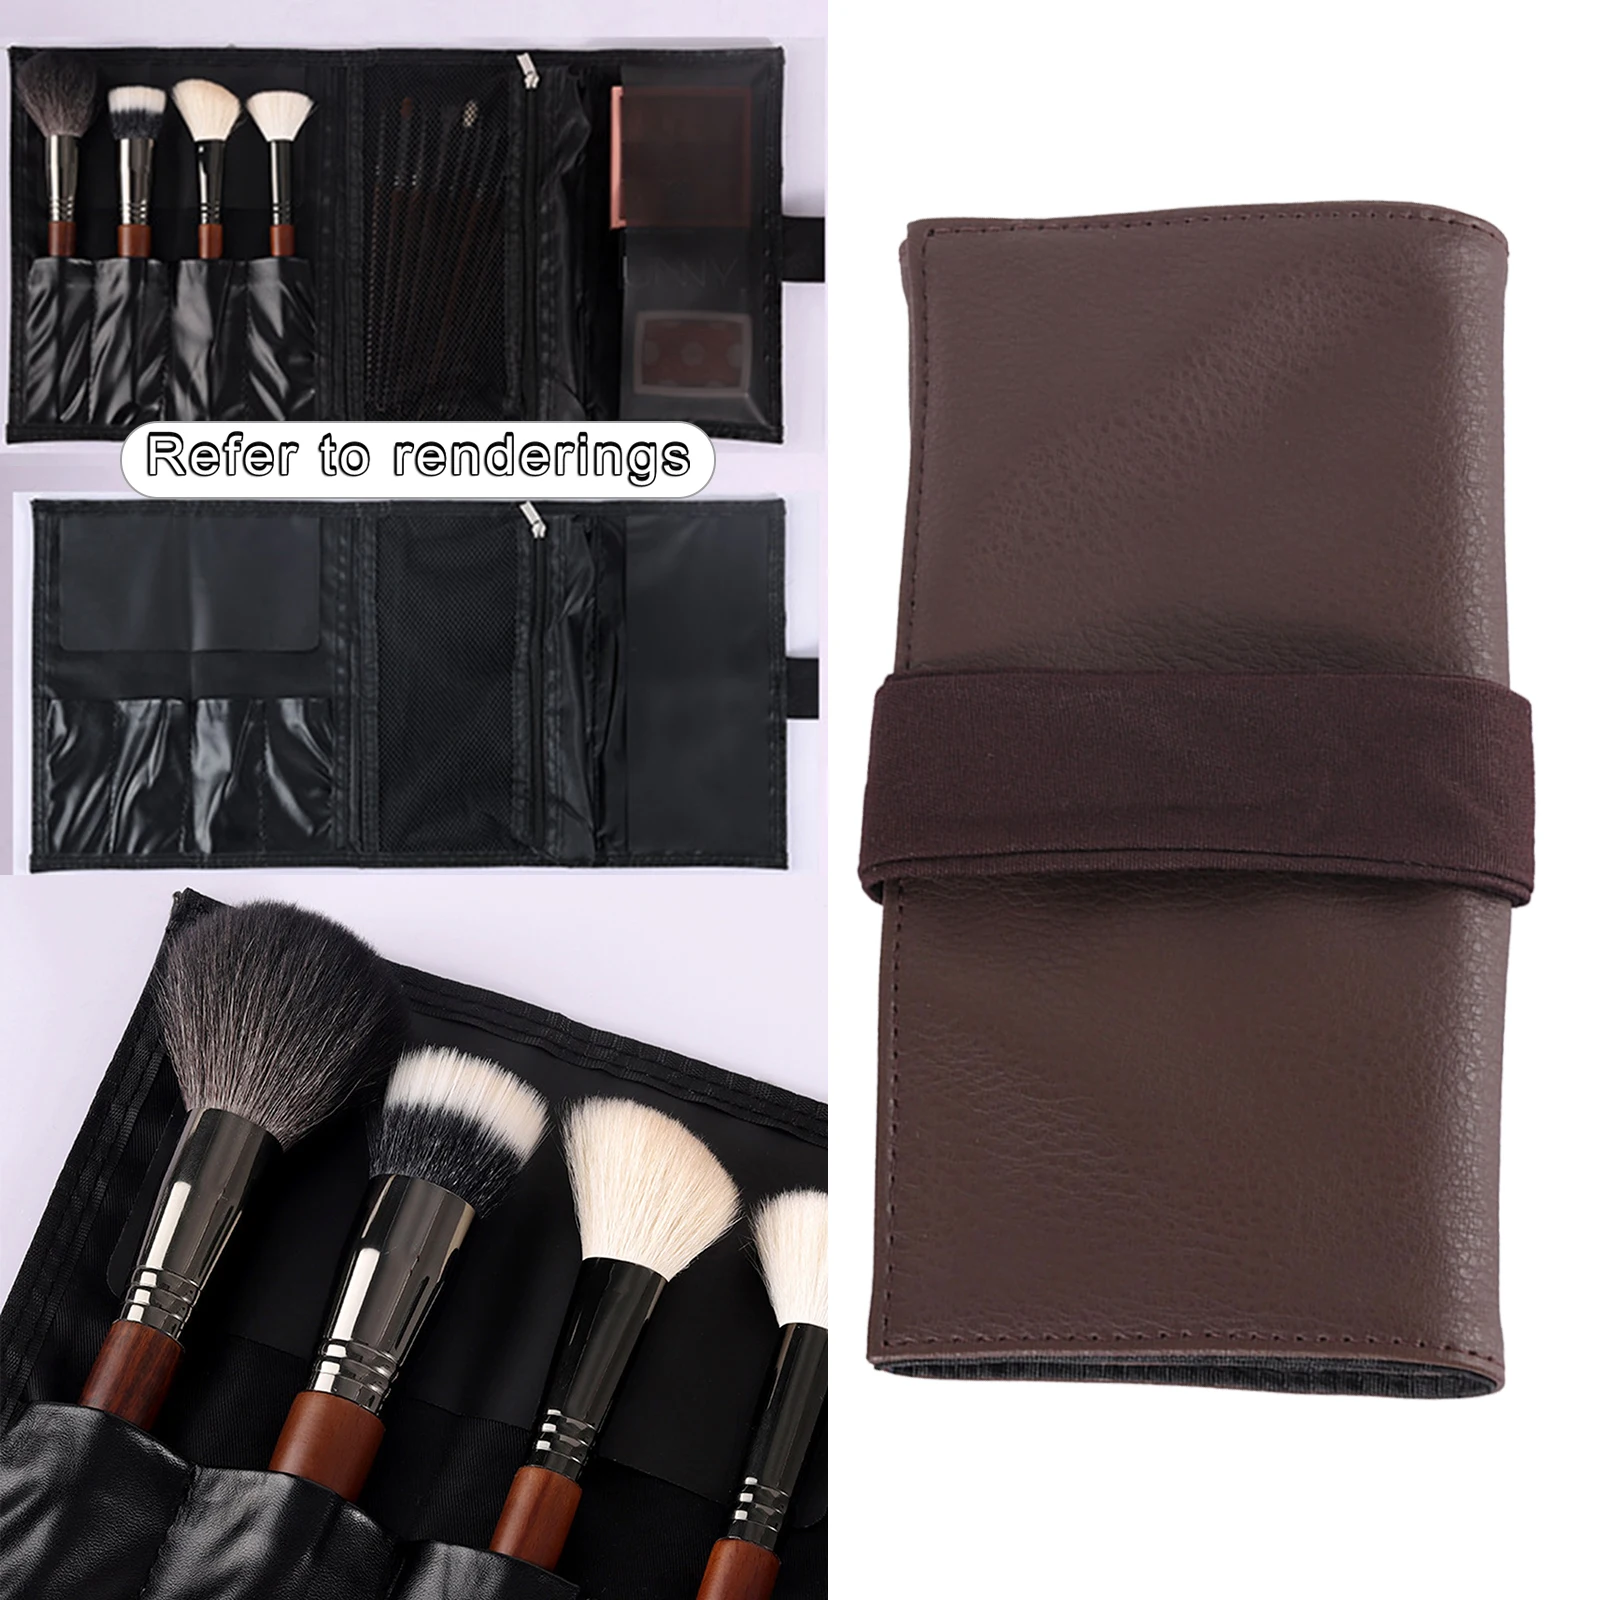 Makeup Brush Bag Foldable Professional Pouch Case for Dating Artists